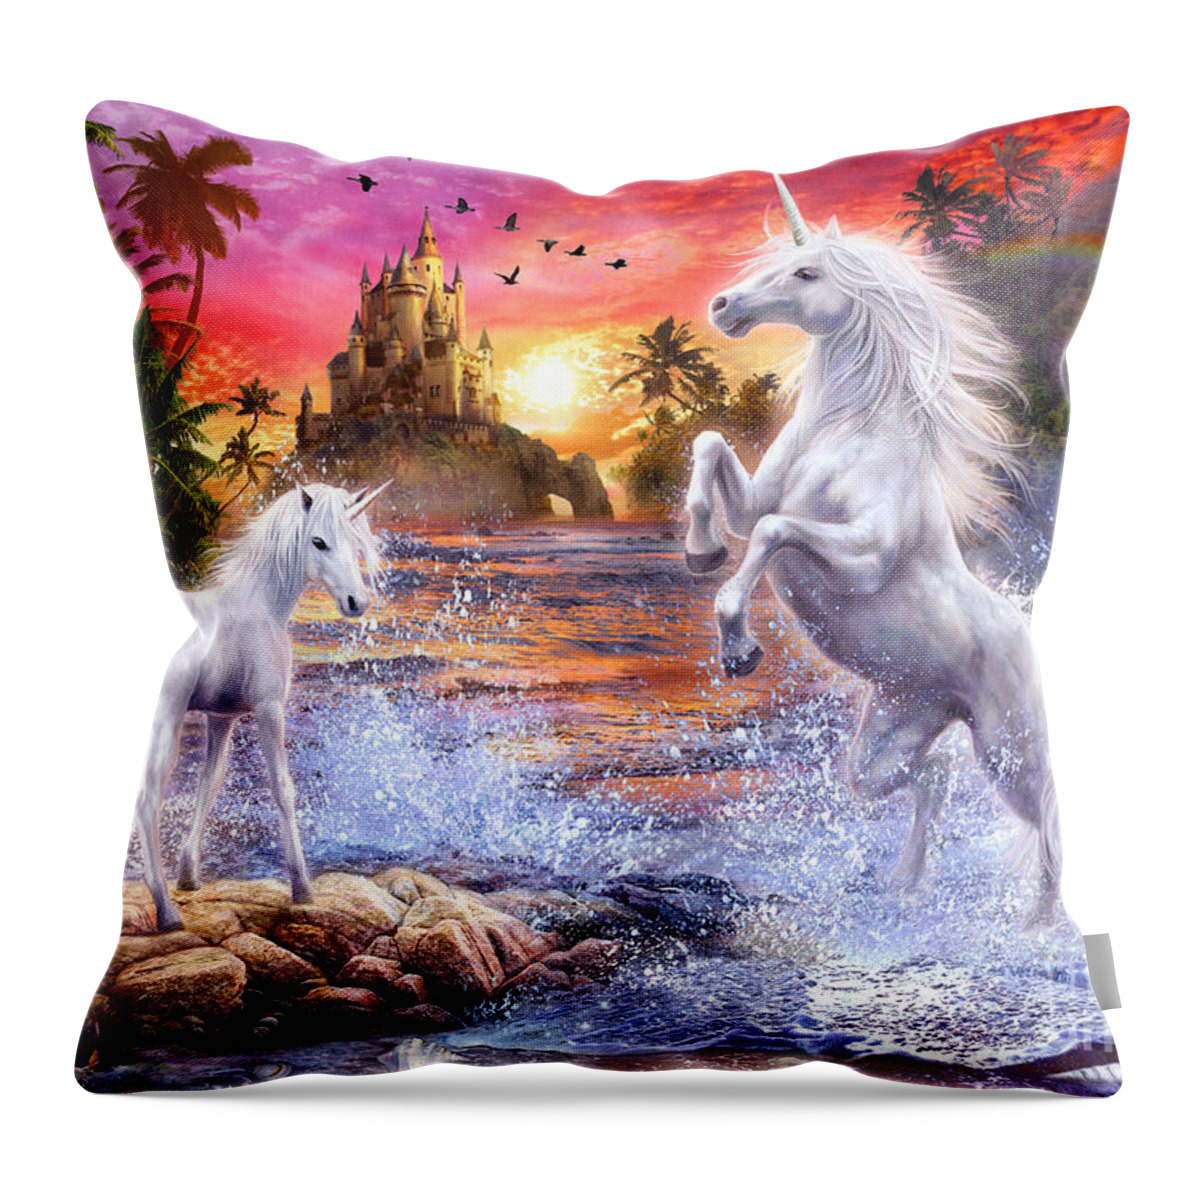 Animals Throw Pillow featuring the digital art Unicorn Waterfall Sunset by MGL Meiklejohn Graphics Licensing